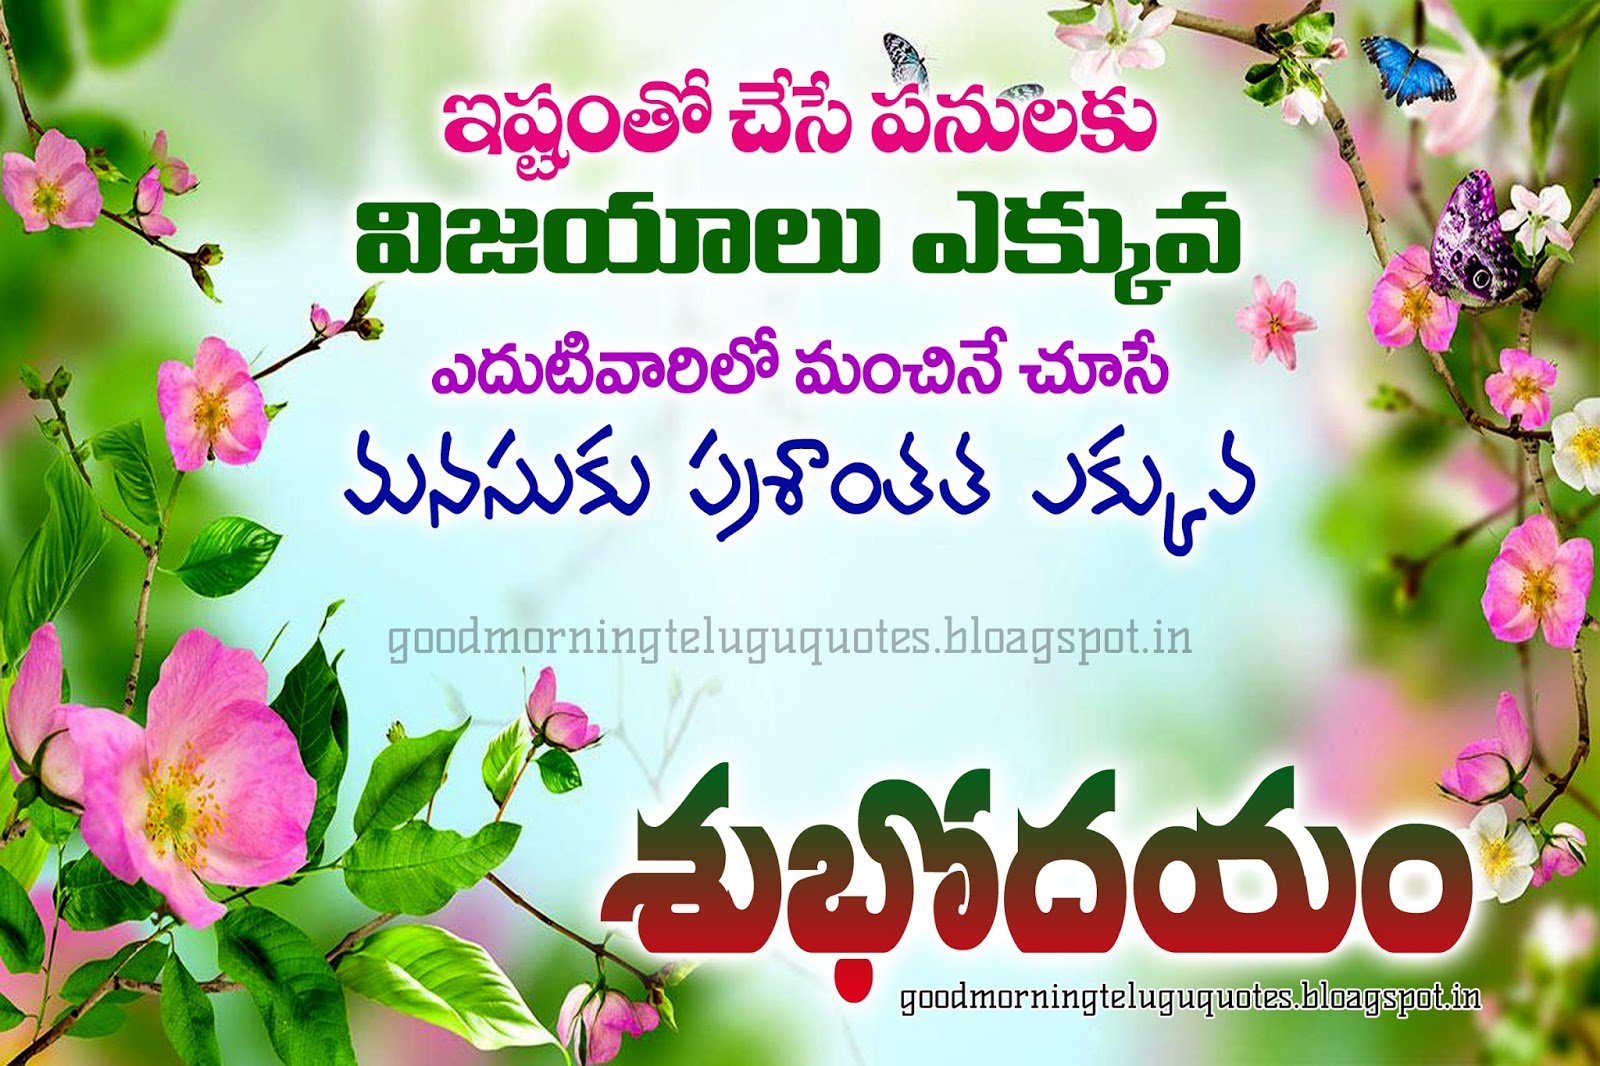 latest telugu good morning wishes quotes greetings hd wallpapers1